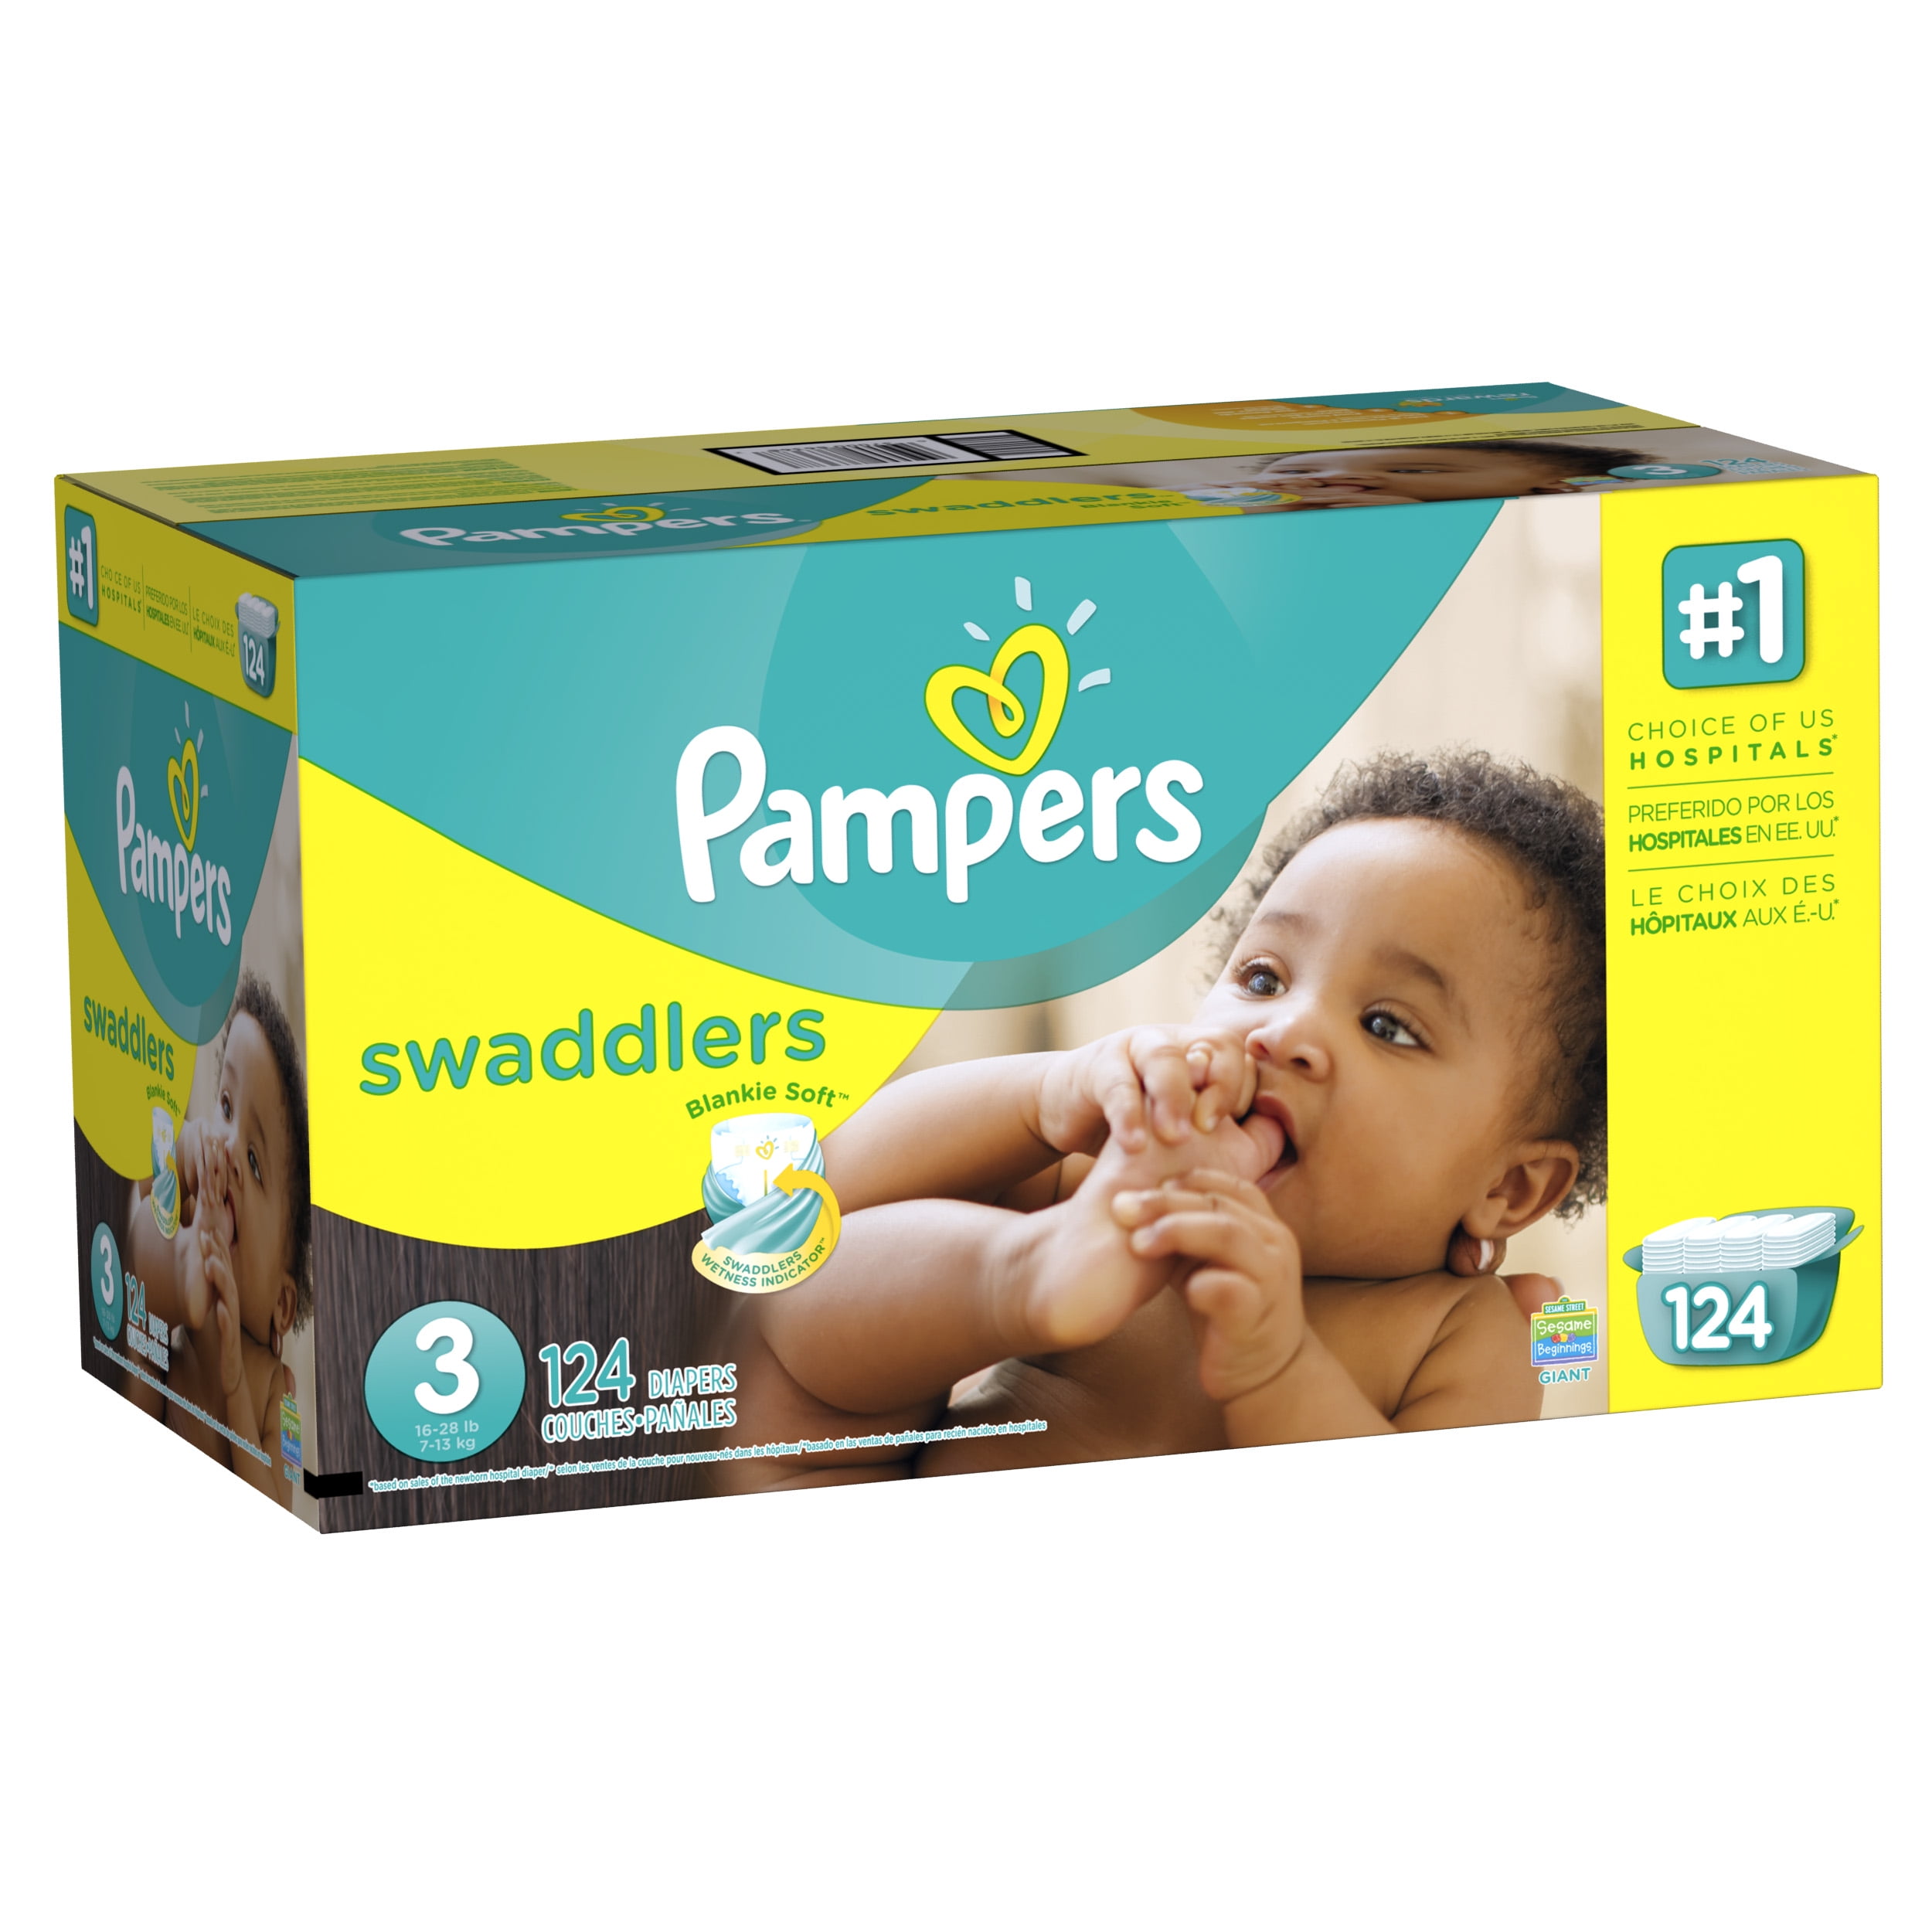 Couches Midi Pampers™ x30 Taille 3